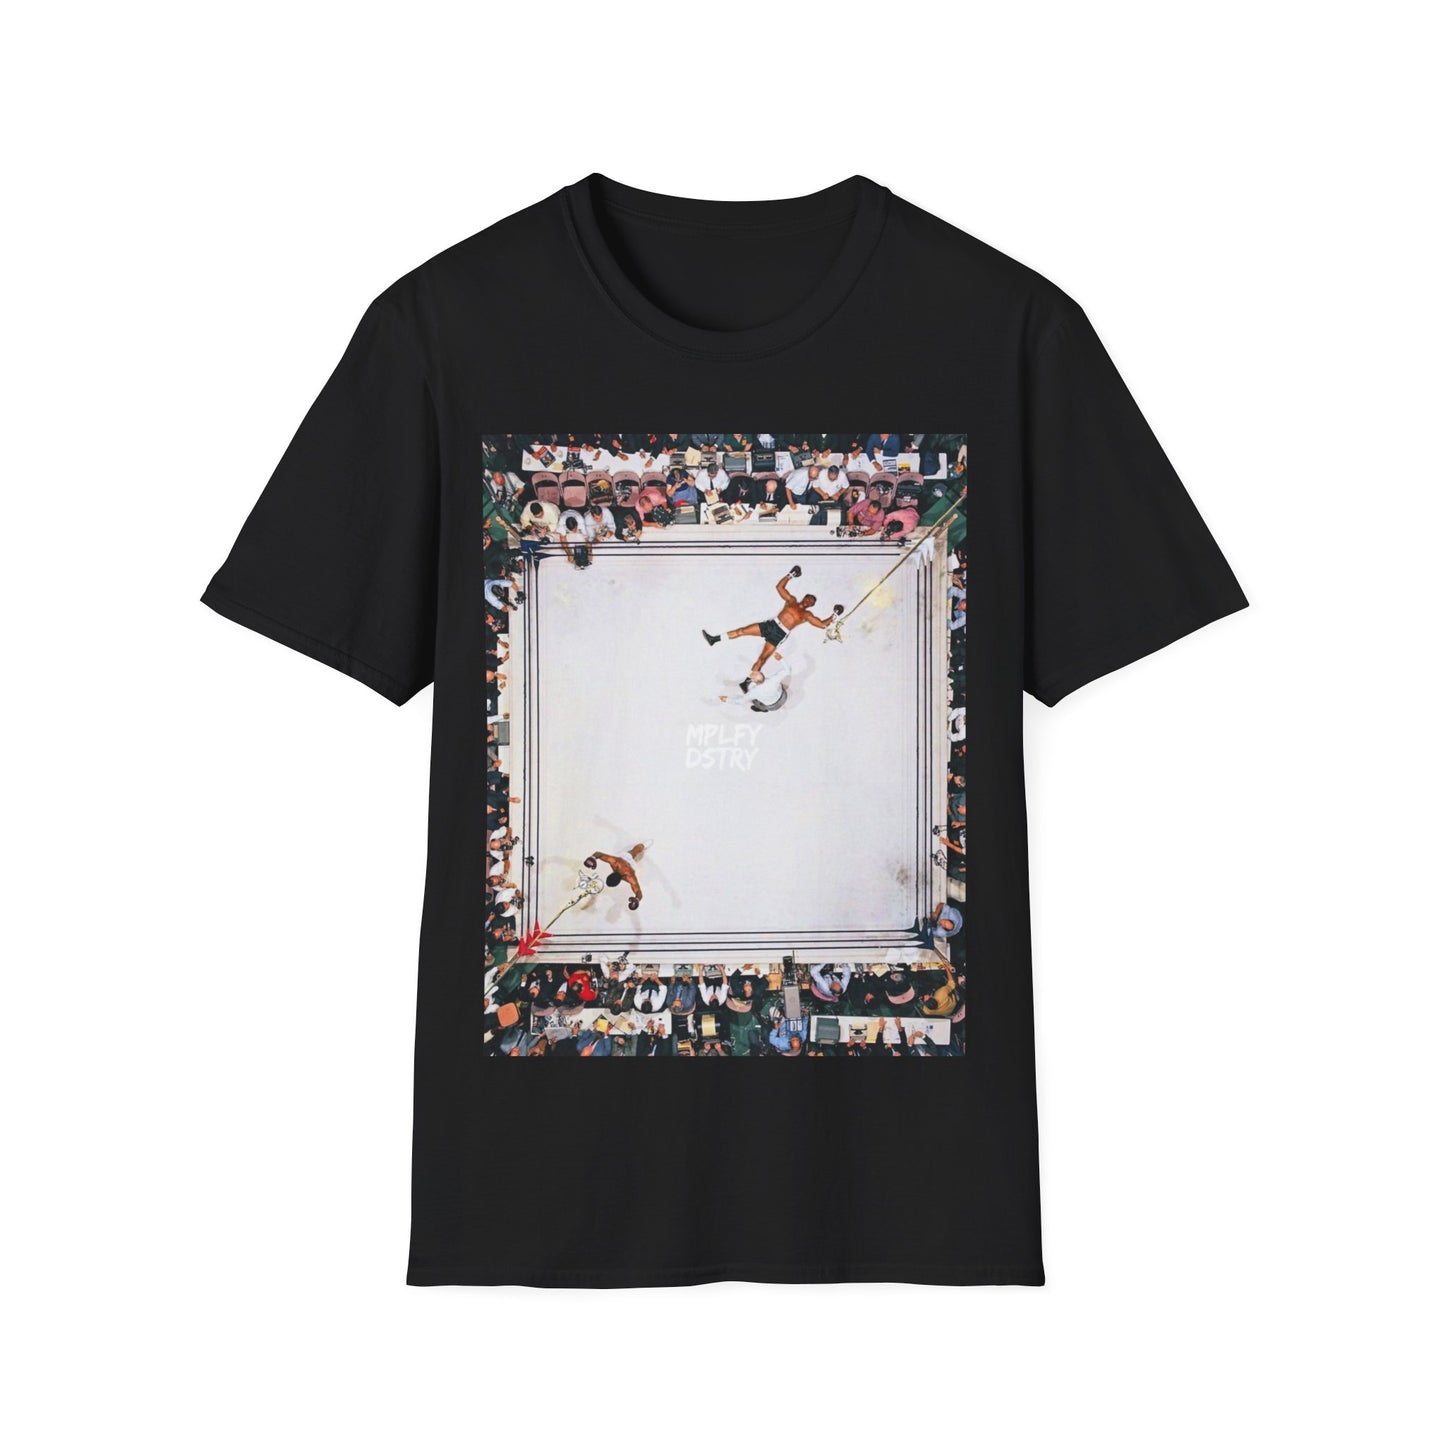 CASSIUS Classic Fit AmplifyDestroy Print Tee Shirt Cassius Clay Muhammad Ali